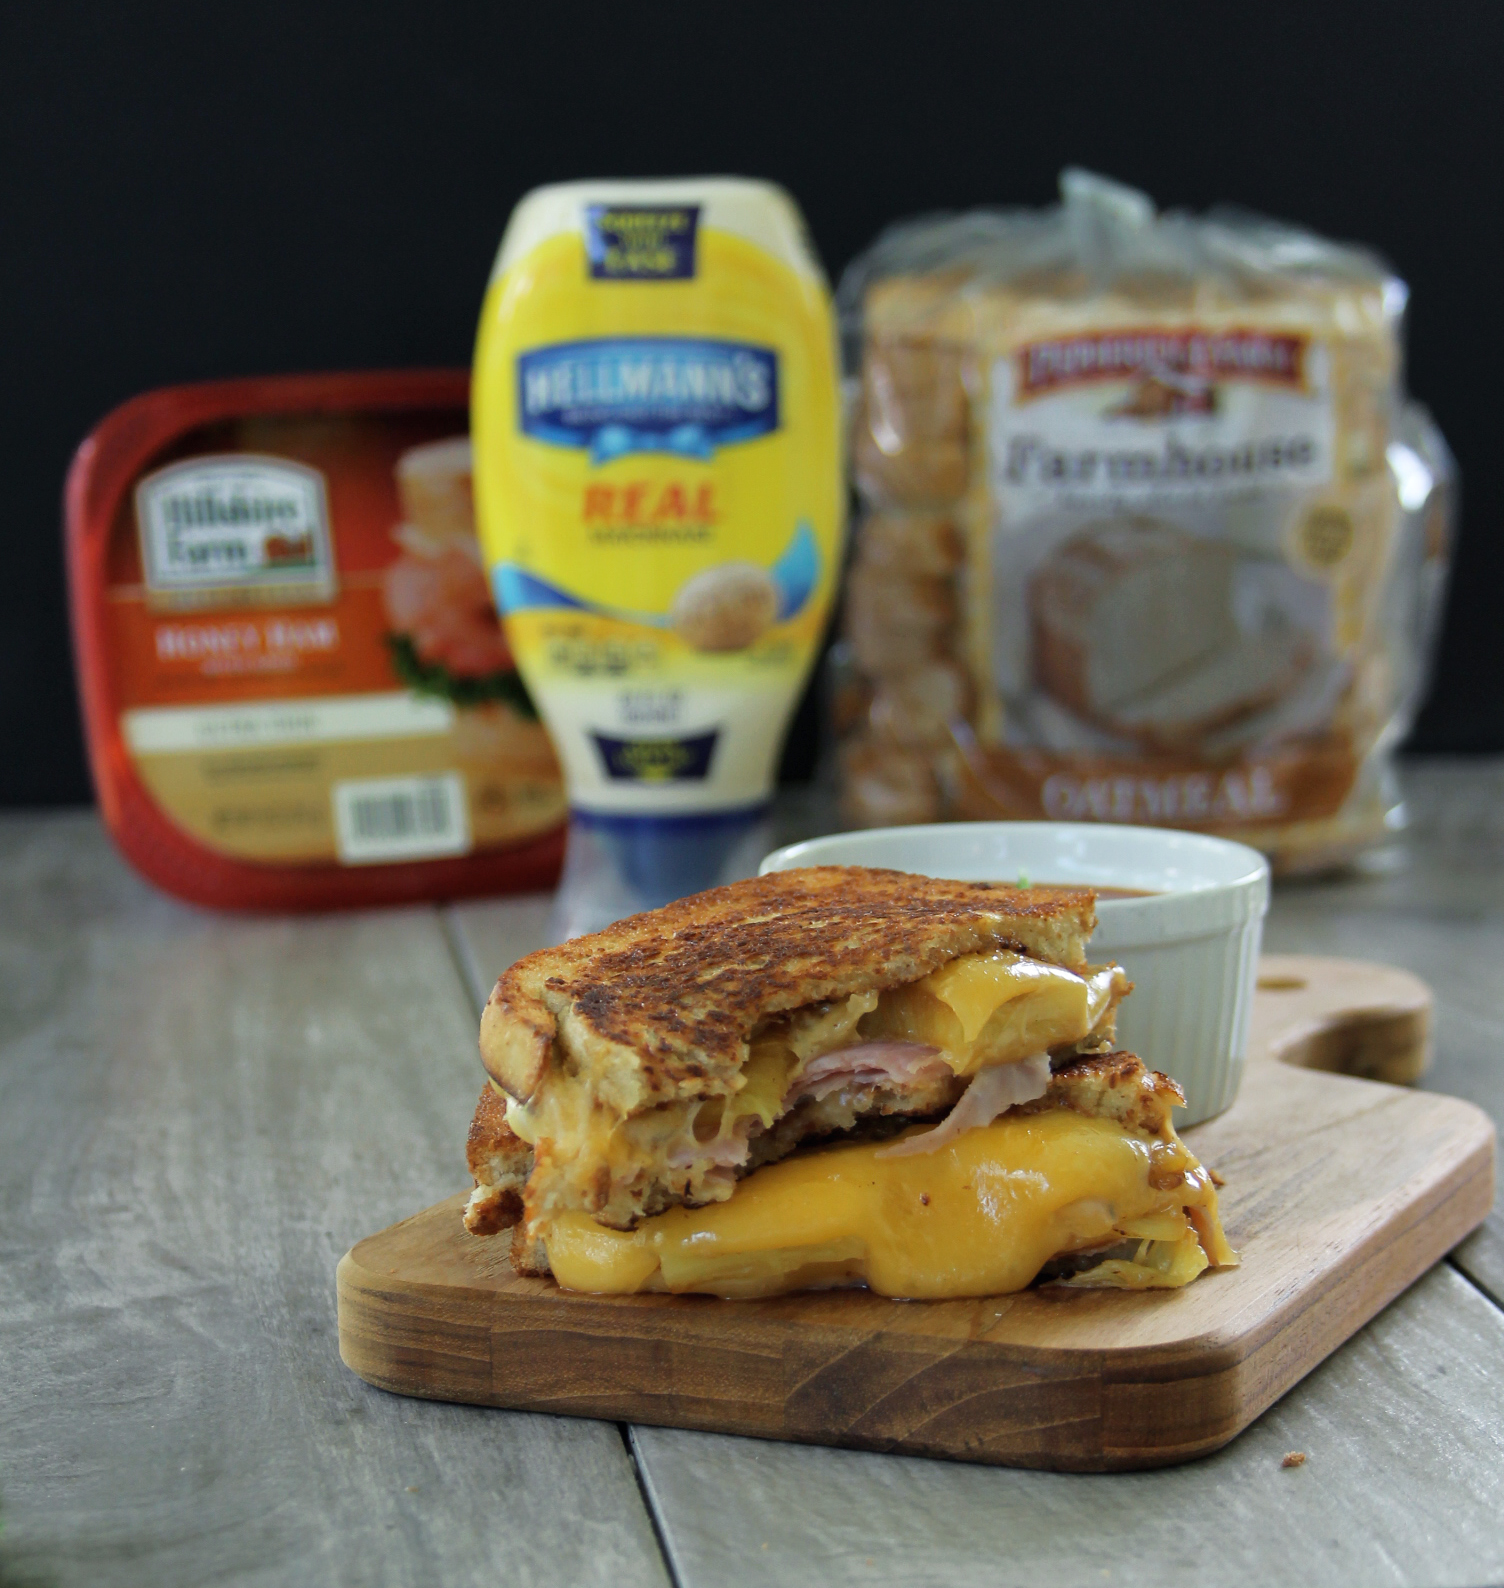 This take on the traditional grilled ham and cheese sandwich adds some tropical flavor with grilled pineapple and teriyaki mayo.